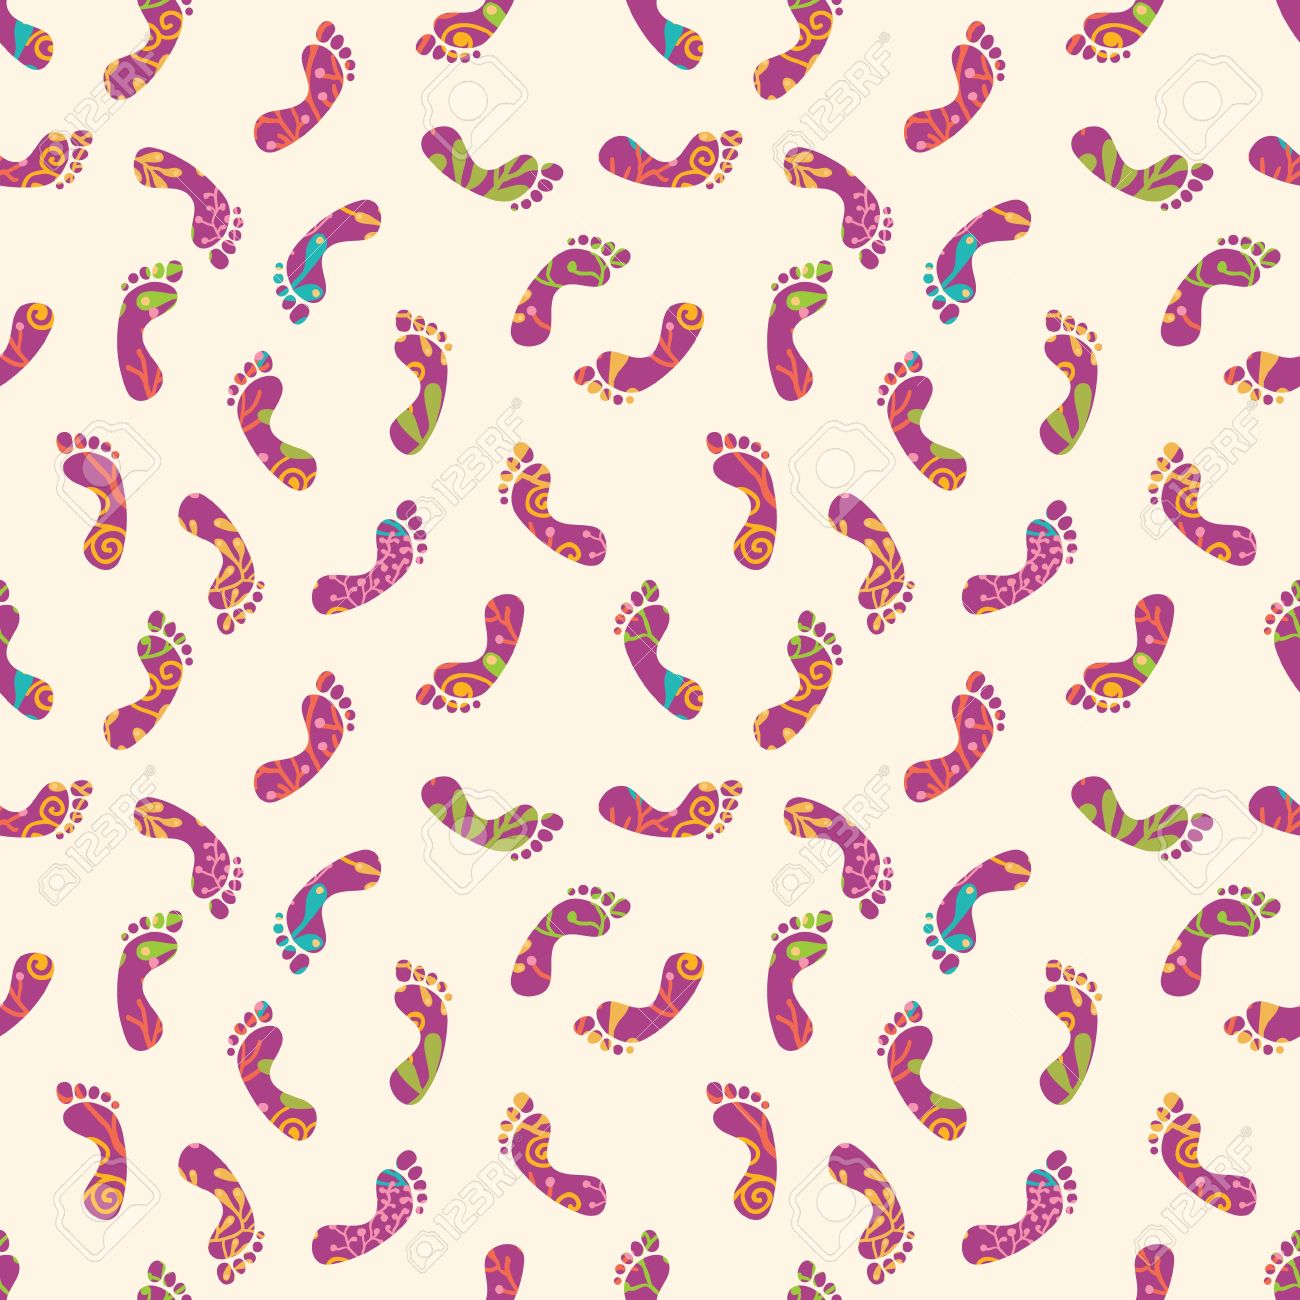 Colorful Foot Prints Seamless Pattern Background Royalty